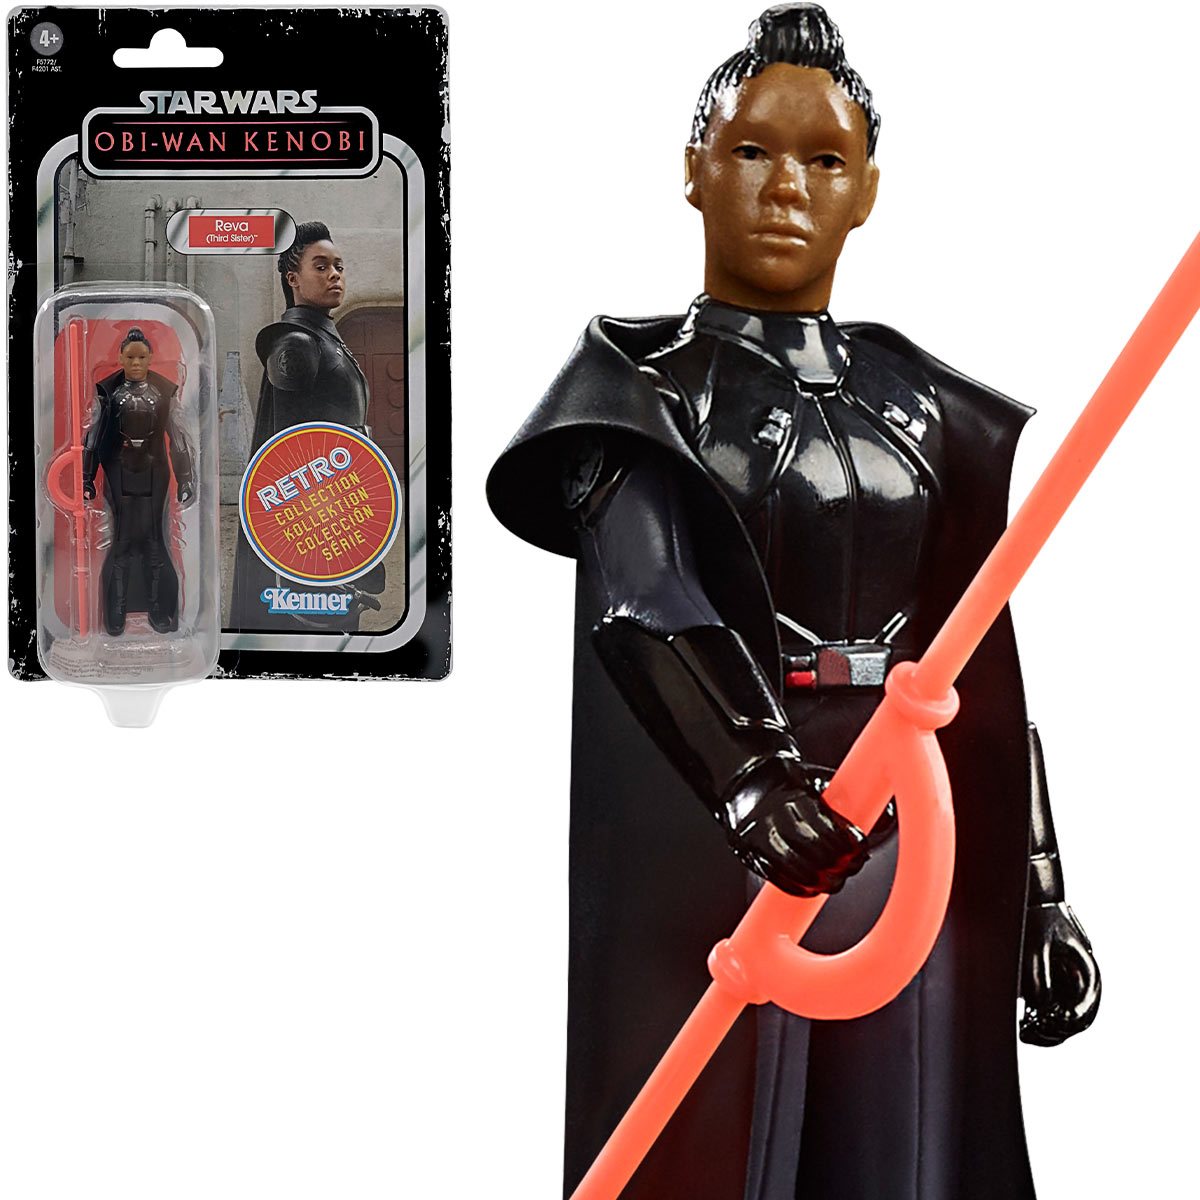 Star Wars The Retro Collection Reva (Third Sister) 3 3/4-Inch Action Figure HSF5772 5010994152352